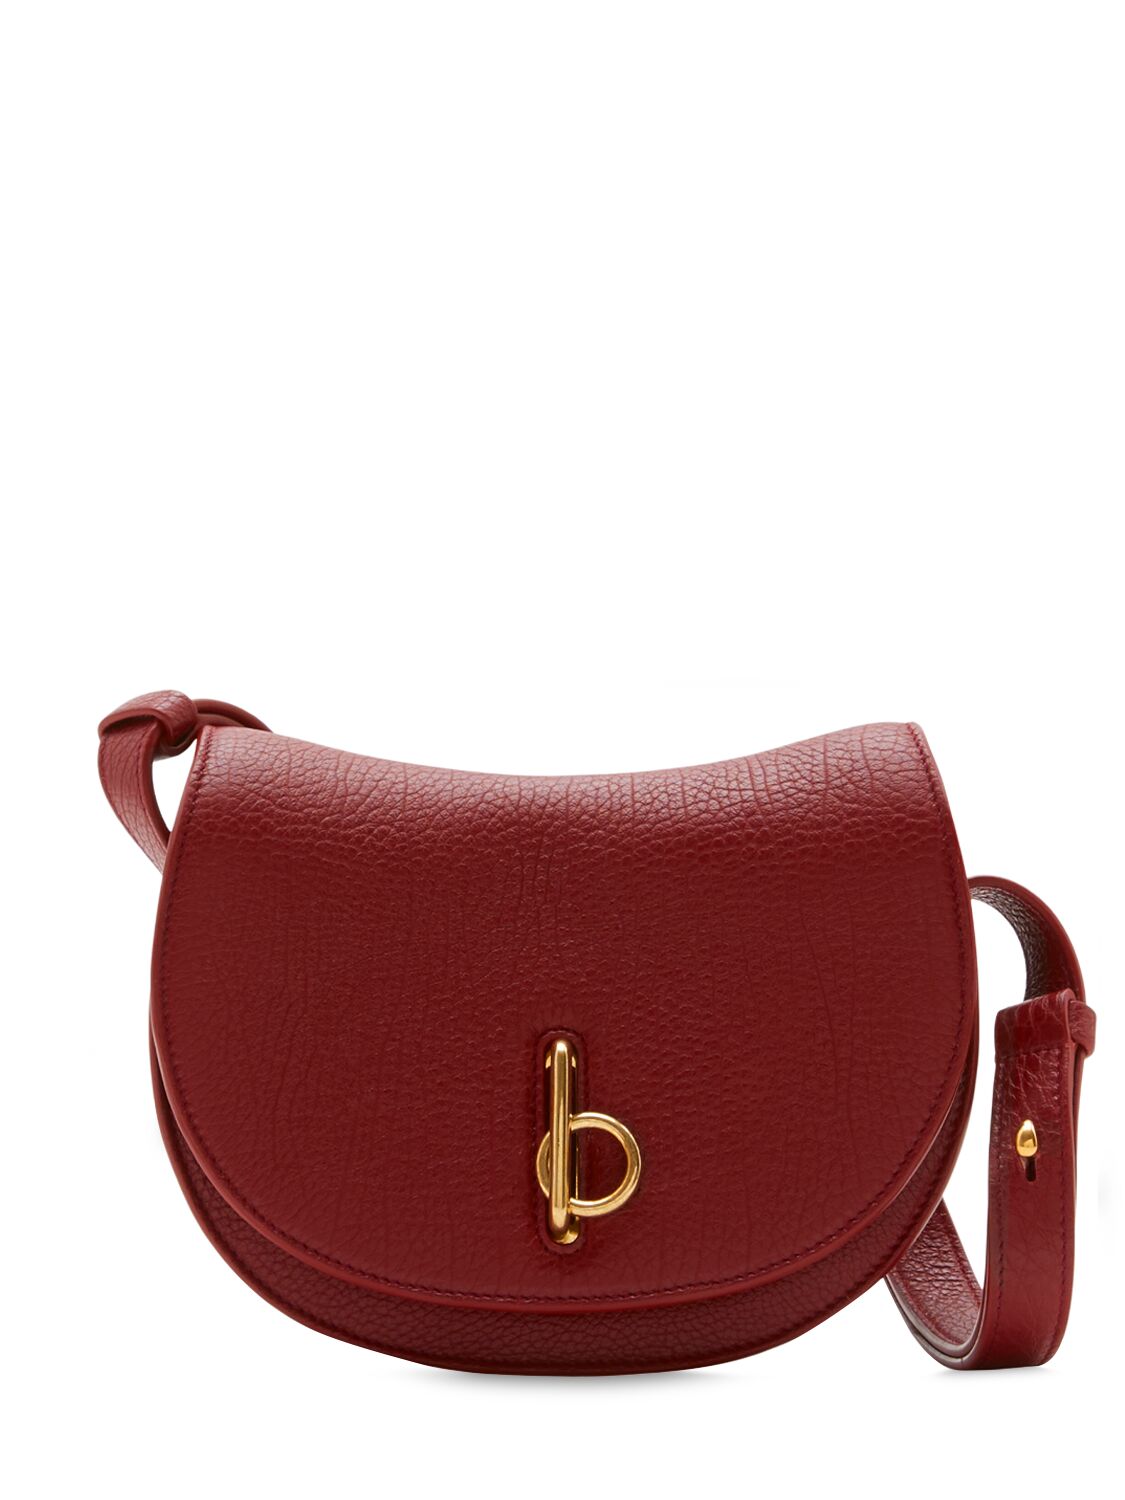 Burberry Mn Rocking Horse Leather Shoulder Bag In Brown